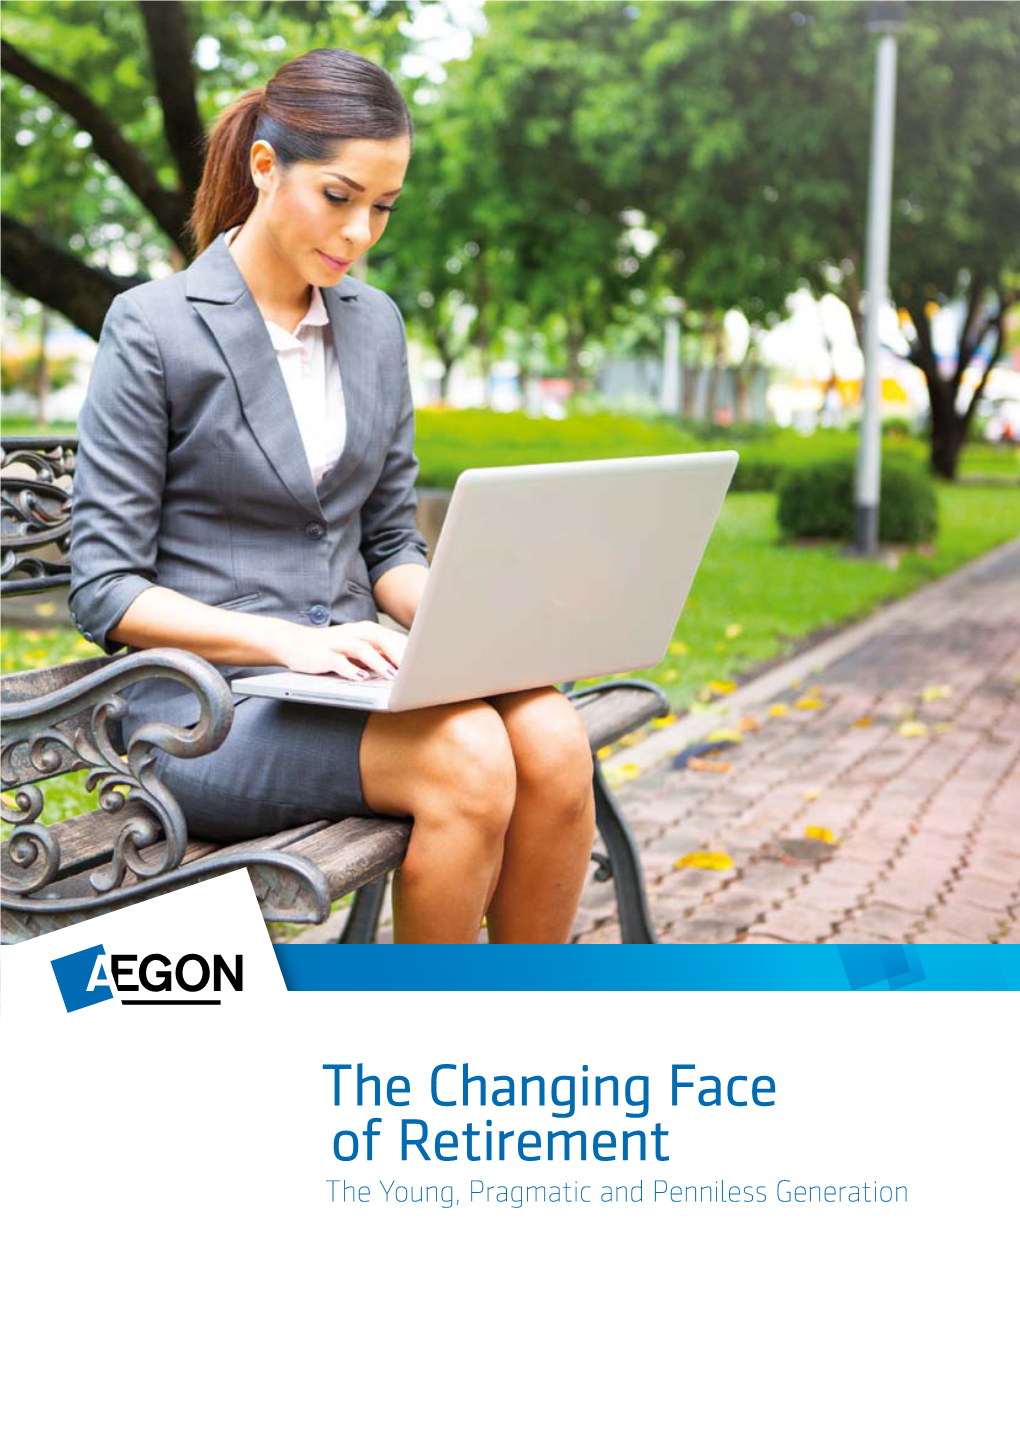 The Changing Face of Retirement the Young, Pragmatic and Penniless Generation